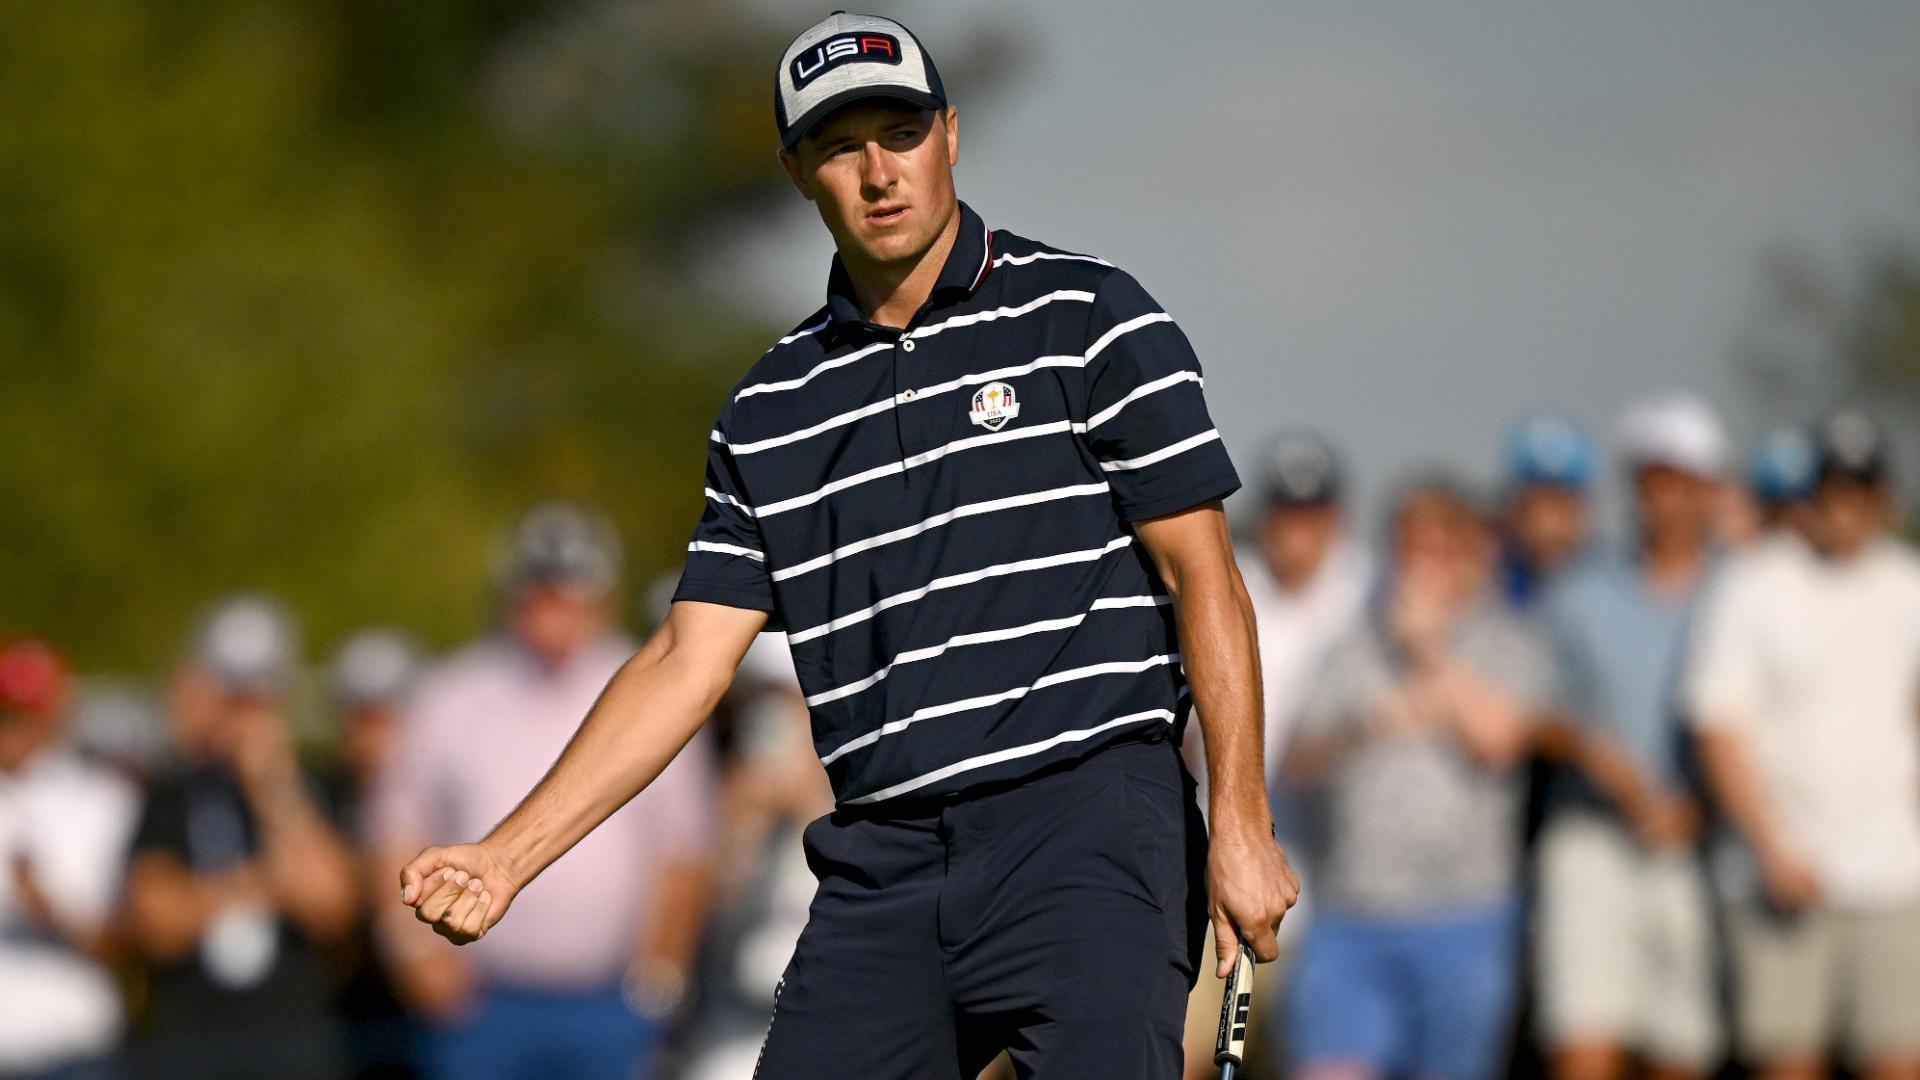 Jordan Spieth chips in to win hole and level match